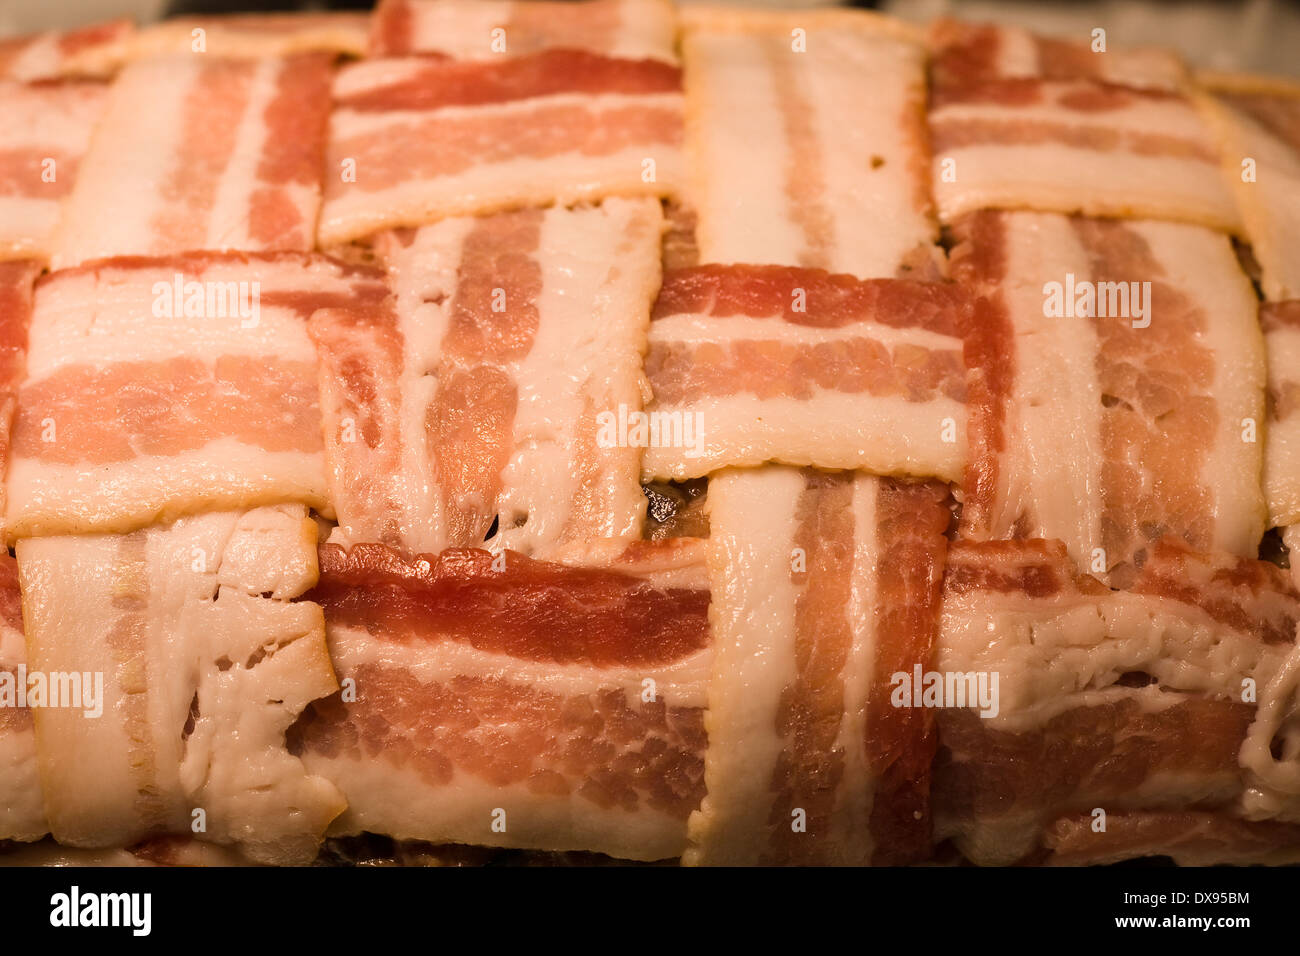 Uncooked Meatloaf wrapped with bacon in a basket weave pattern sitting in a clear Pyrex baking dish on a kitchen stovetop Stock Photo